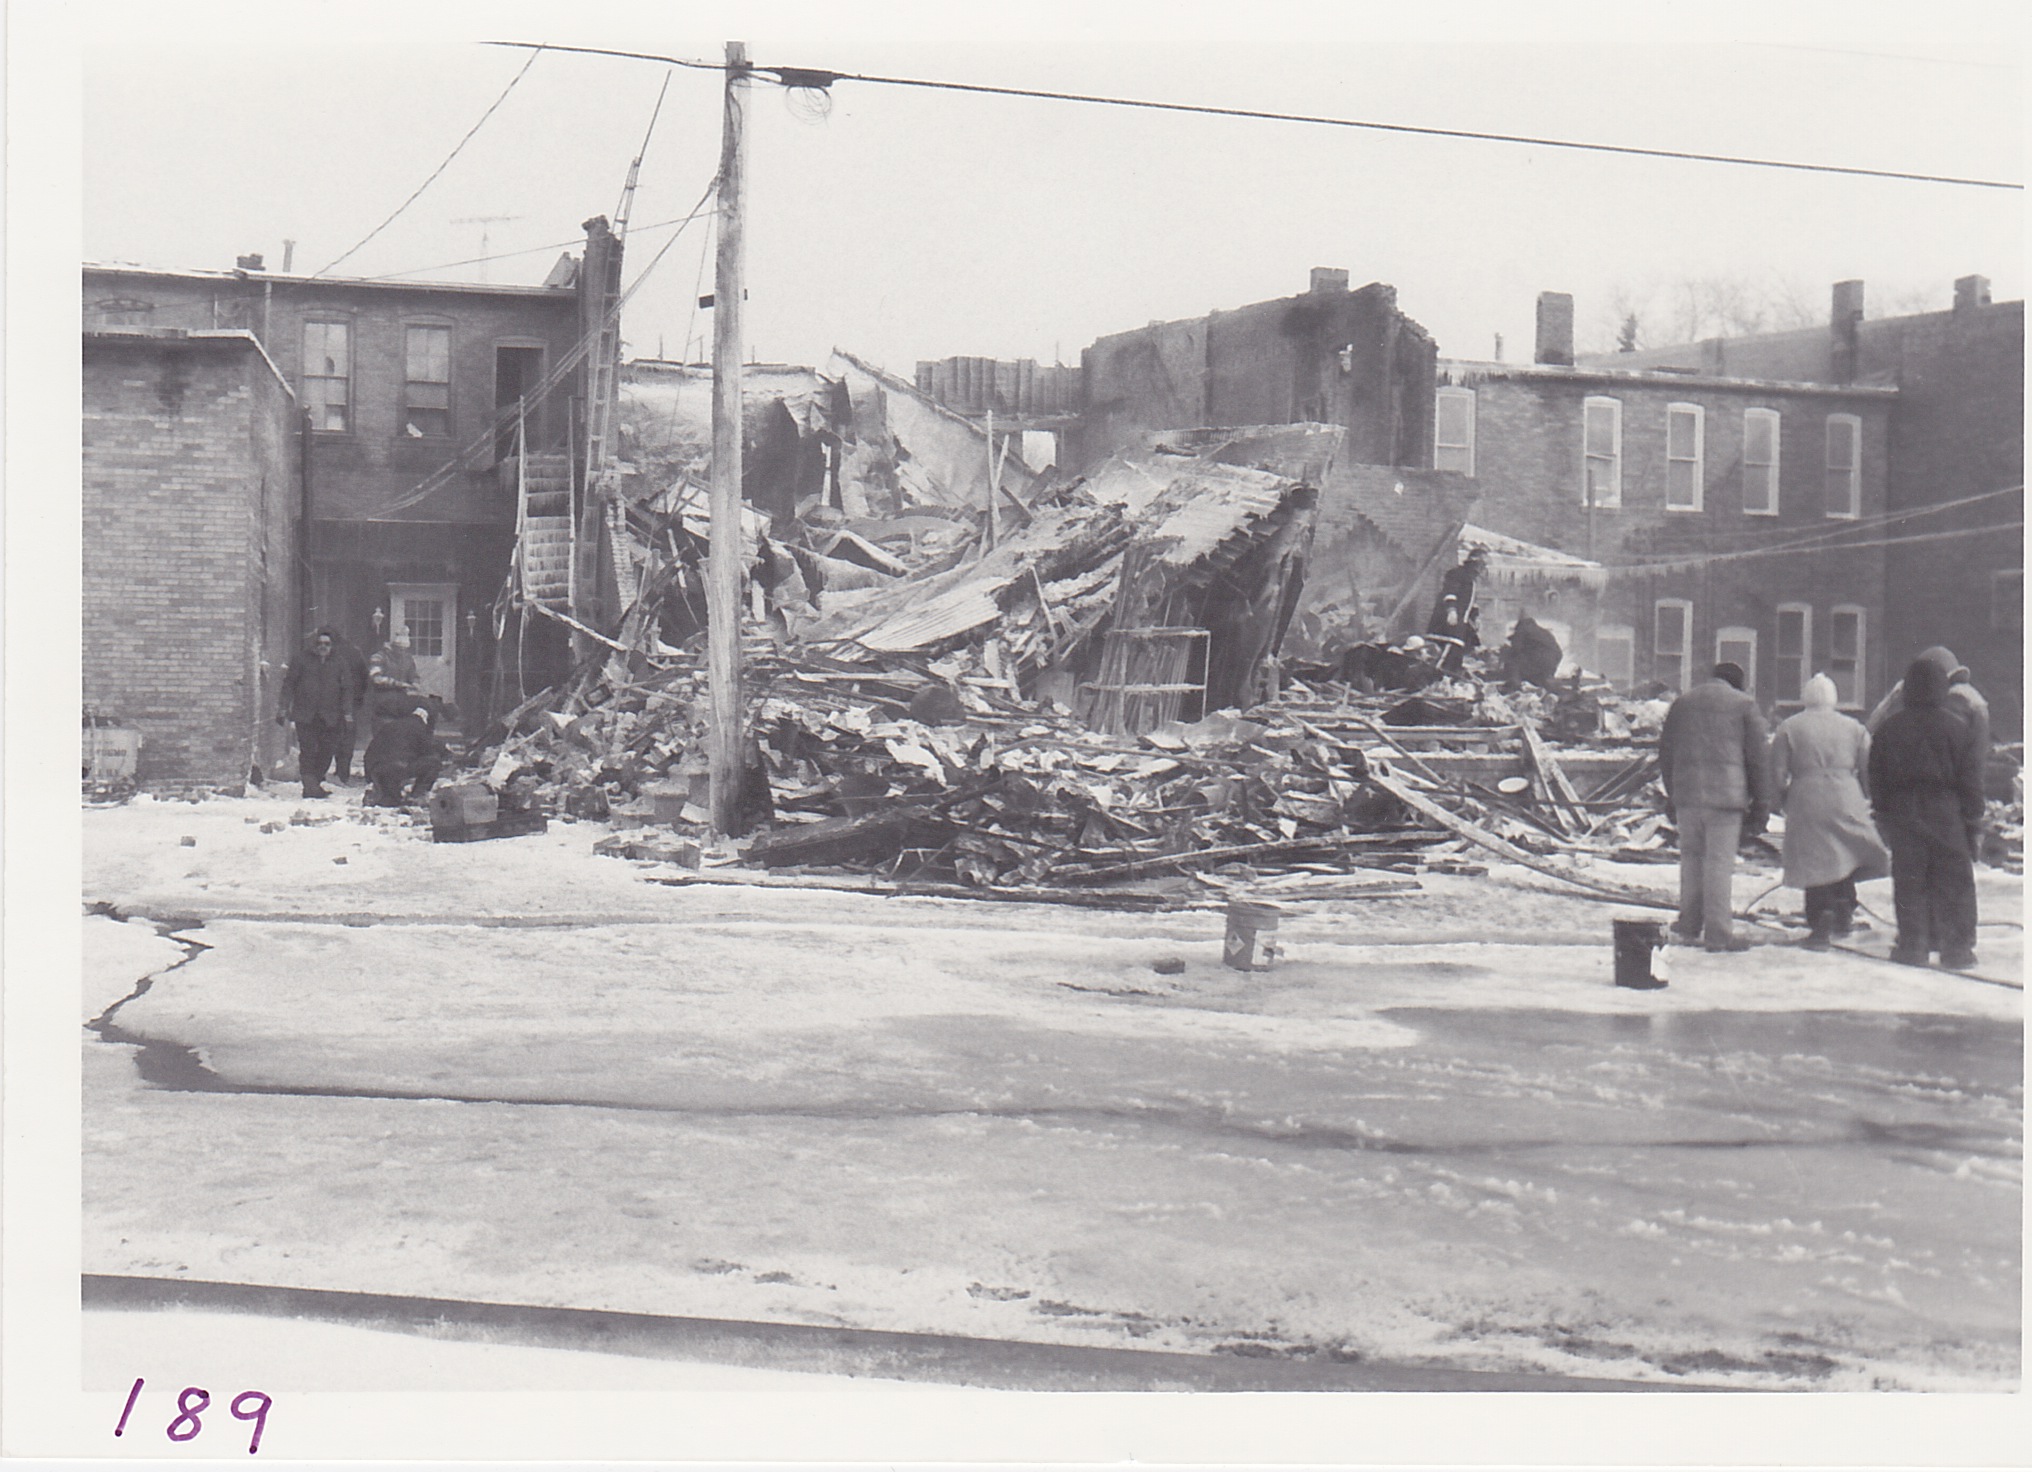 A rear view of damaged Gamble Store Building.  Firemen can be seen looking for store records among debris.